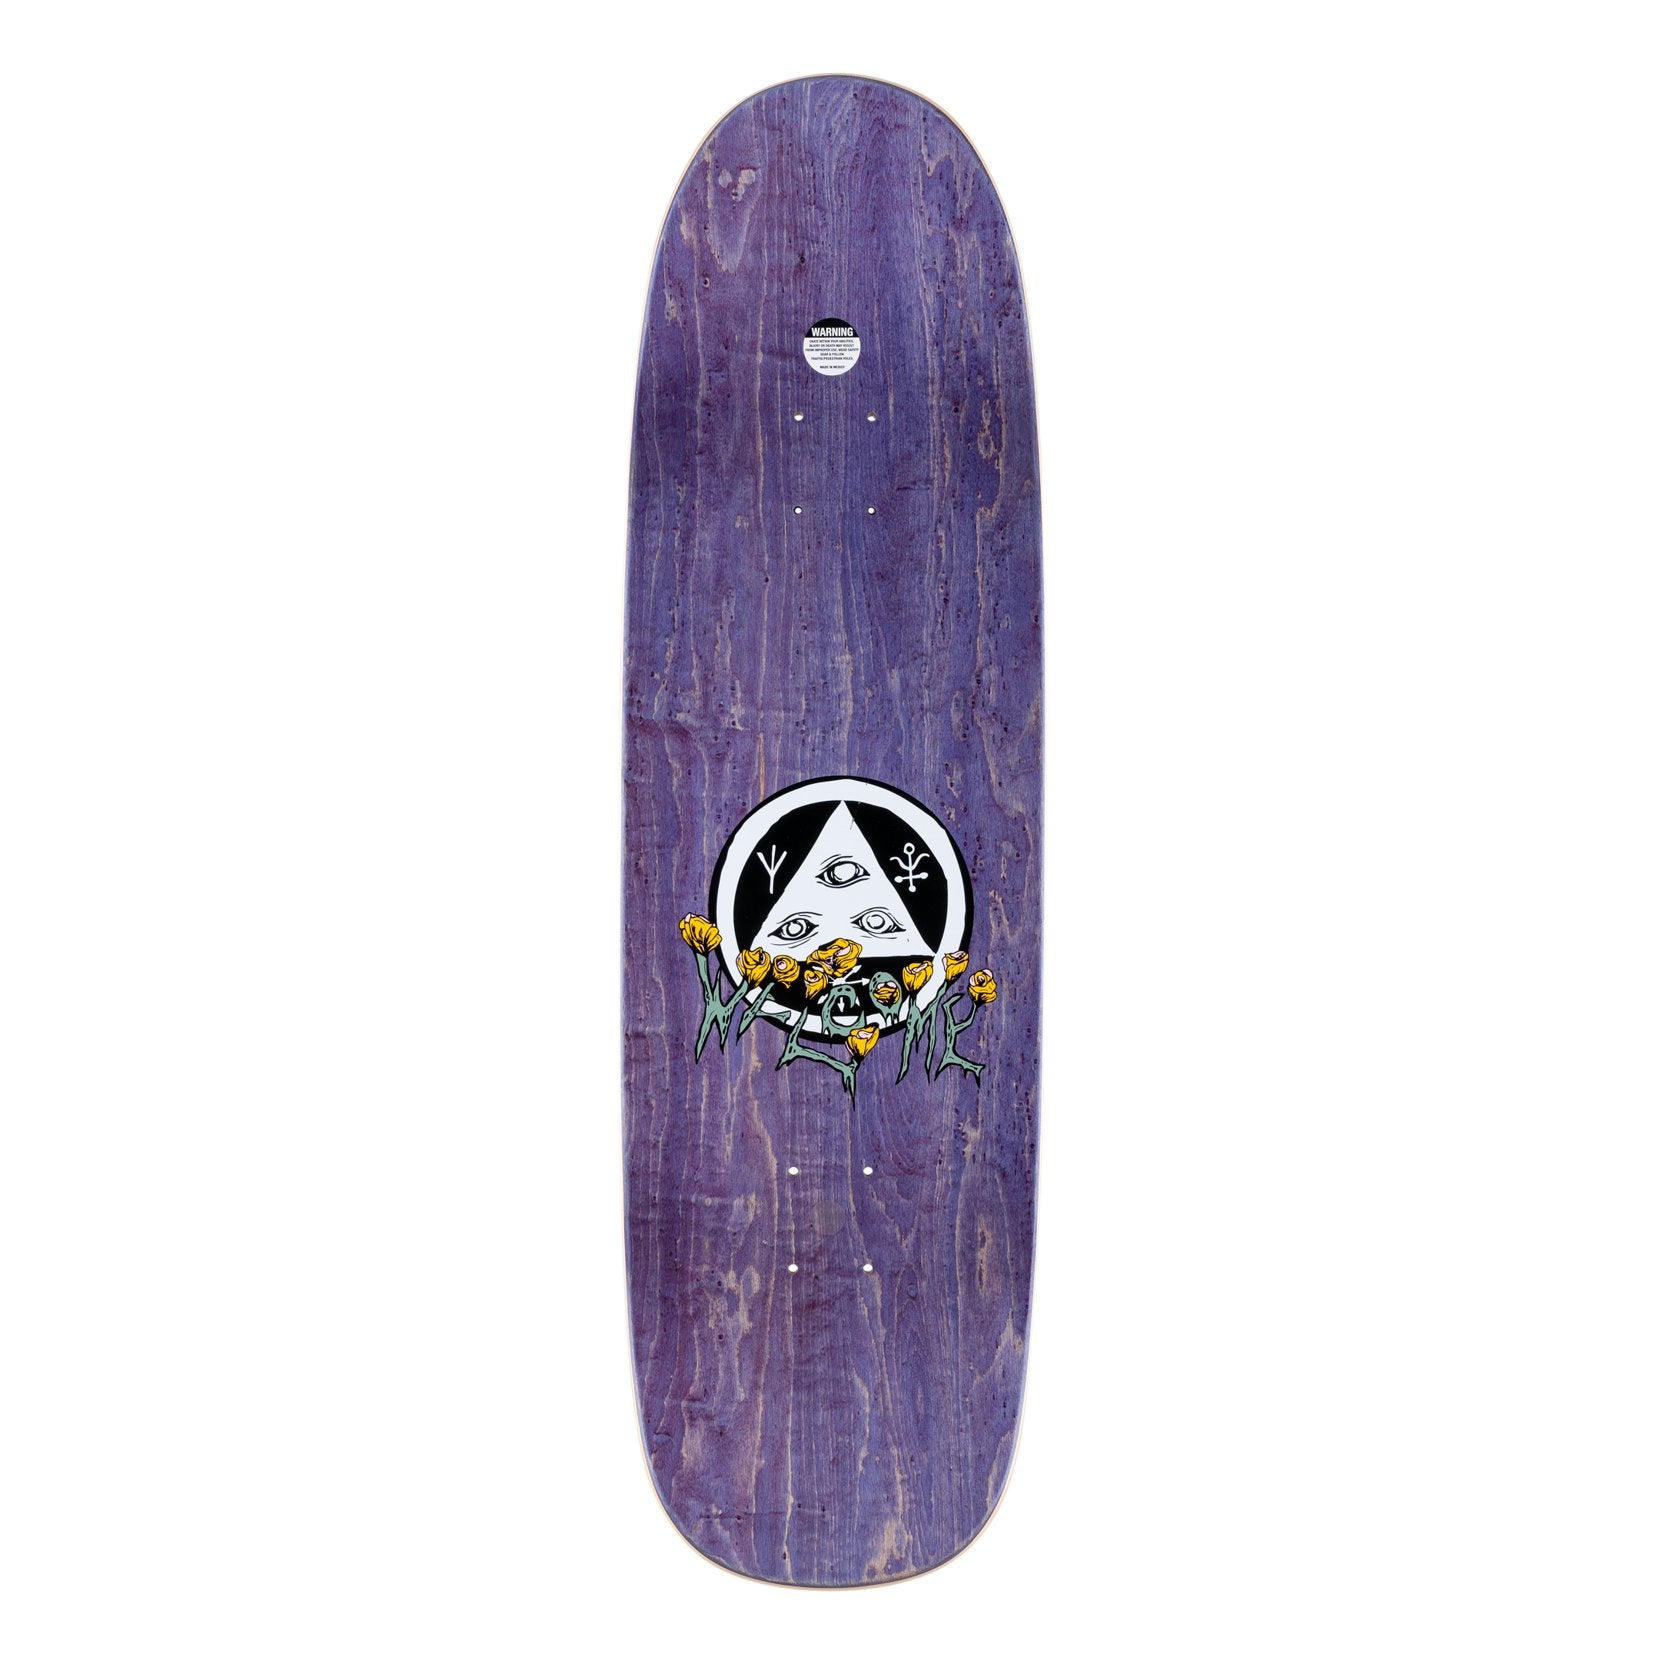 WELCOME DECK - ZOMBIE LOVE ON BOLINE BLACK (9.25") - The Drive Skateshop